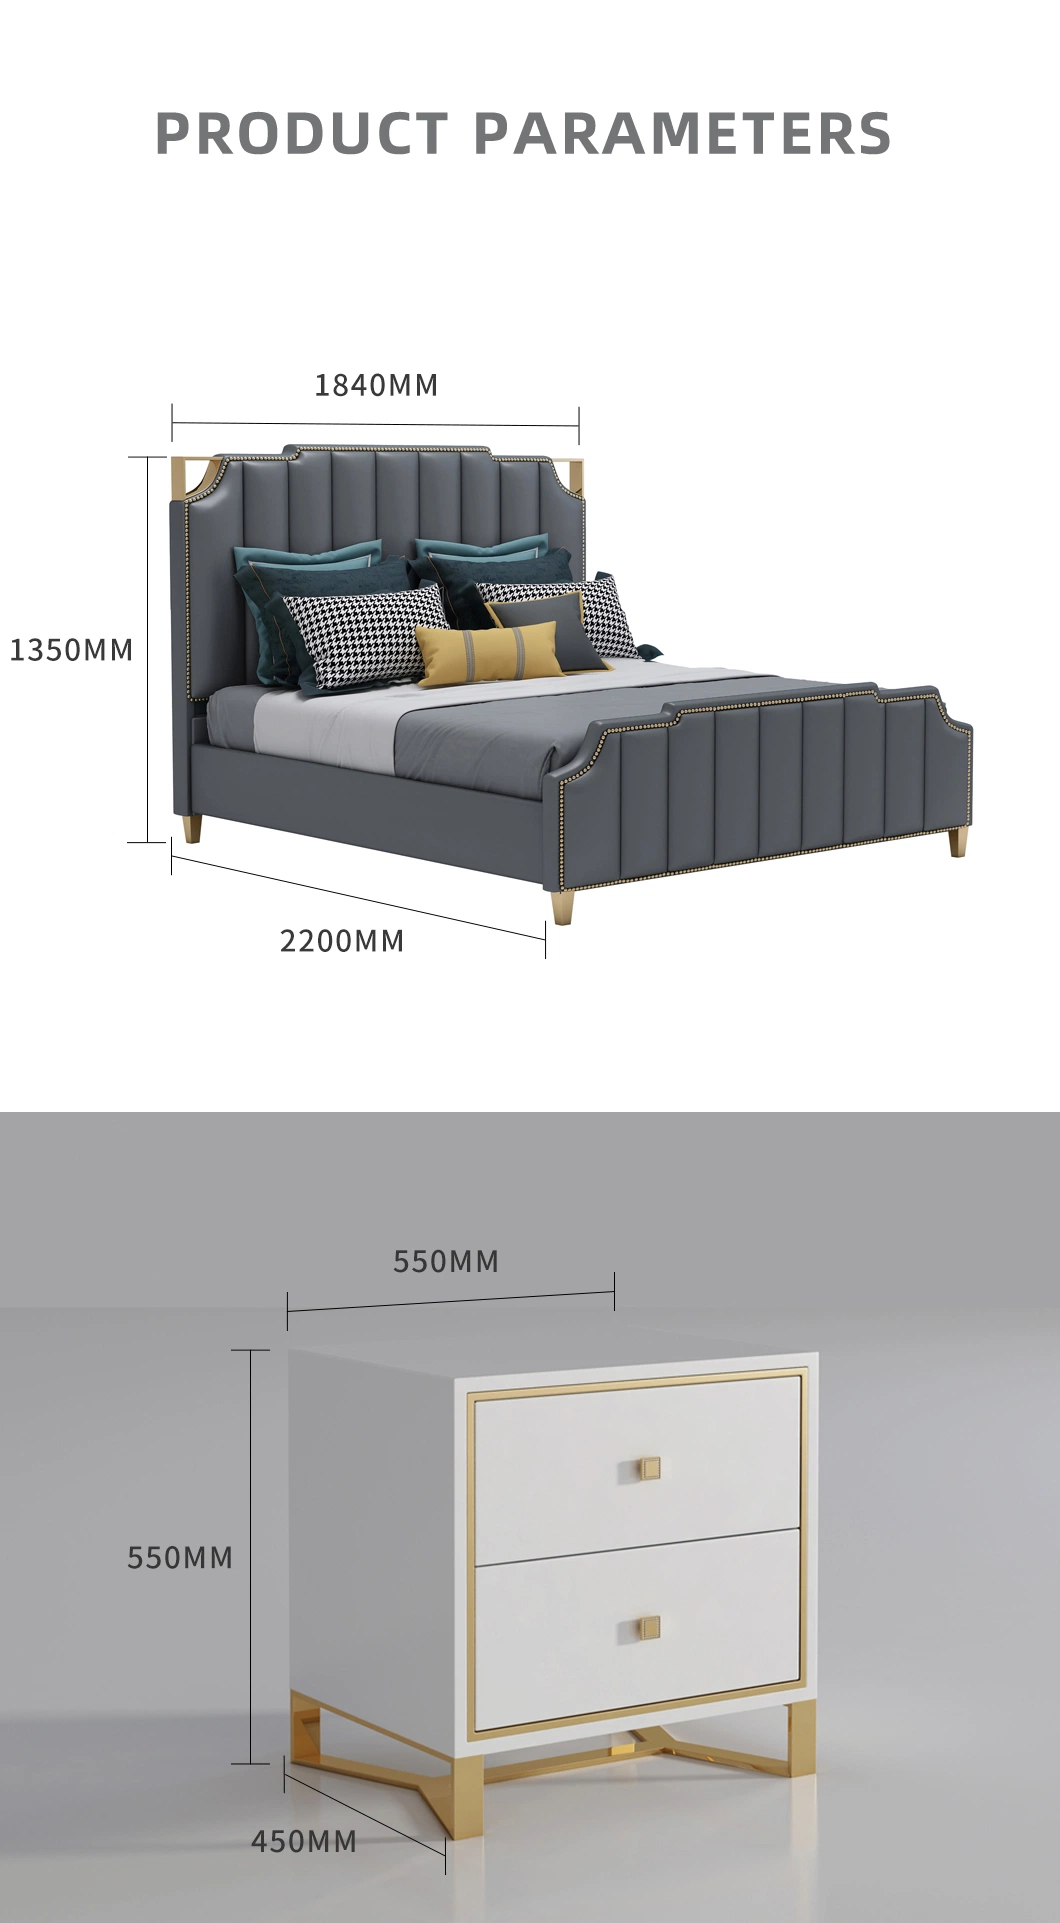 Modern Luxury Home Metal Leather Wooden King Size Bed Bedroom Furniture Sets